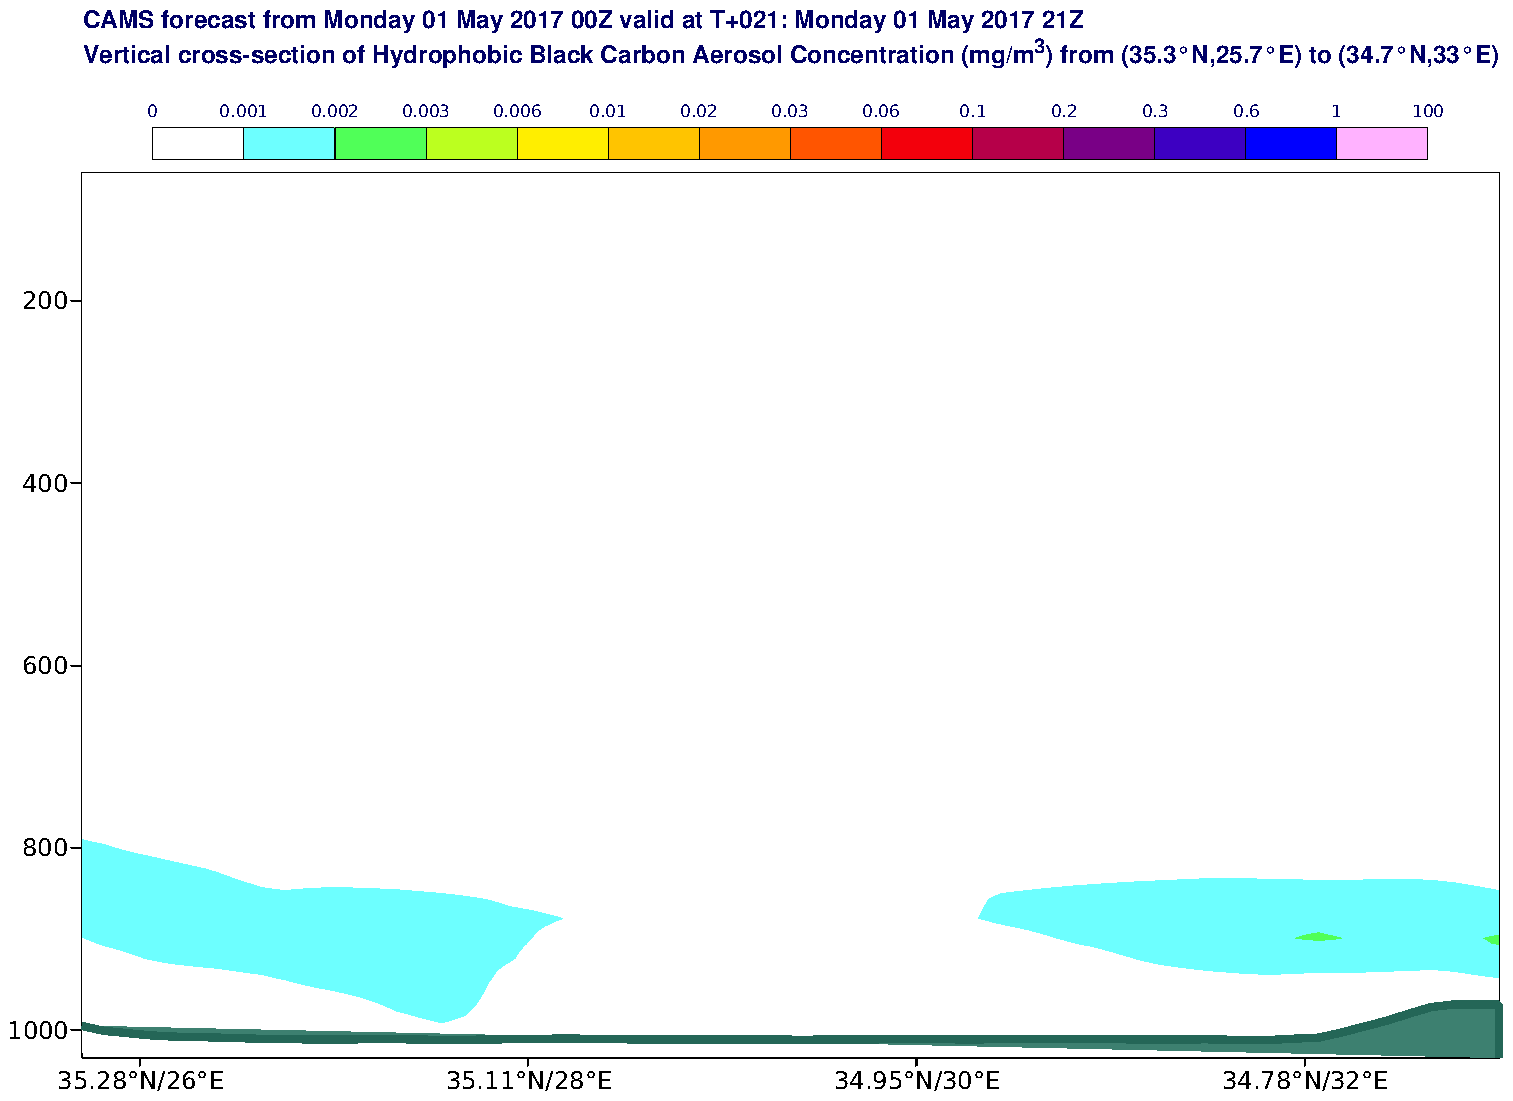 Vertical cross-section of Hydrophobic Black Carbon Aerosol Concentration (mg/m3) valid at T21 - 2017-05-01 21:00